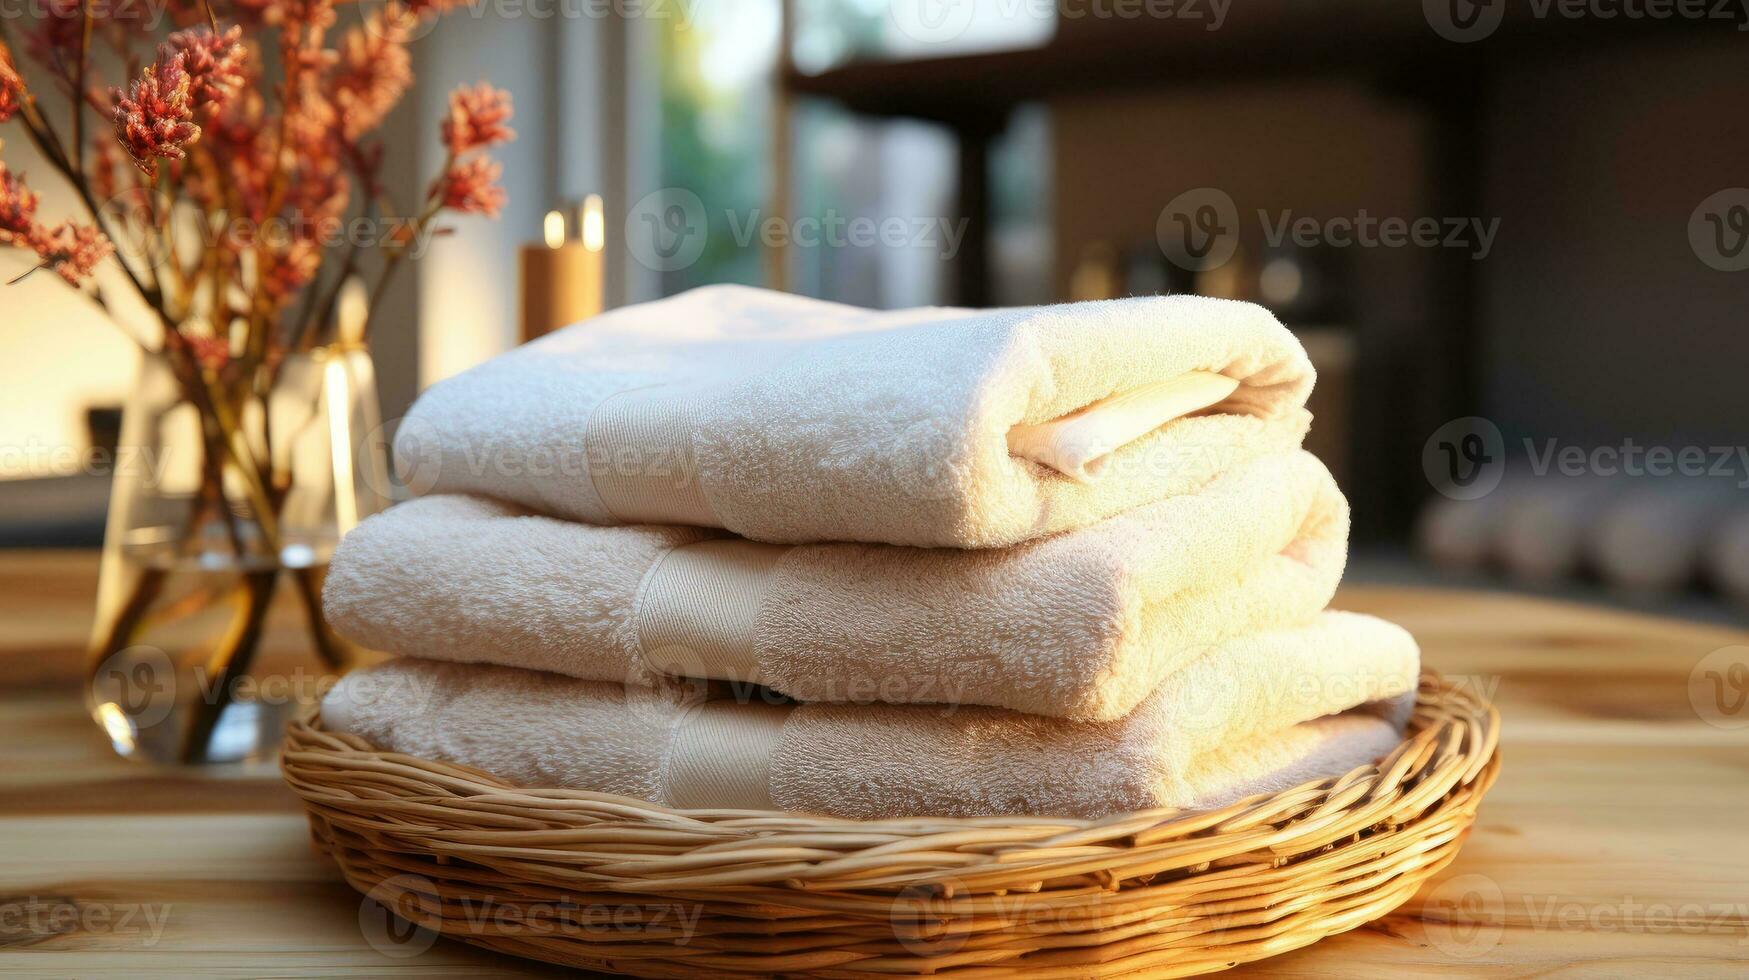 https://static.vecteezy.com/system/resources/previews/035/729/333/non_2x/ai-generated-clean-dry-soft-cotton-fluffy-neatly-folded-towels-for-shower-bath-and-spa-ai-generated-image-photo.jpg